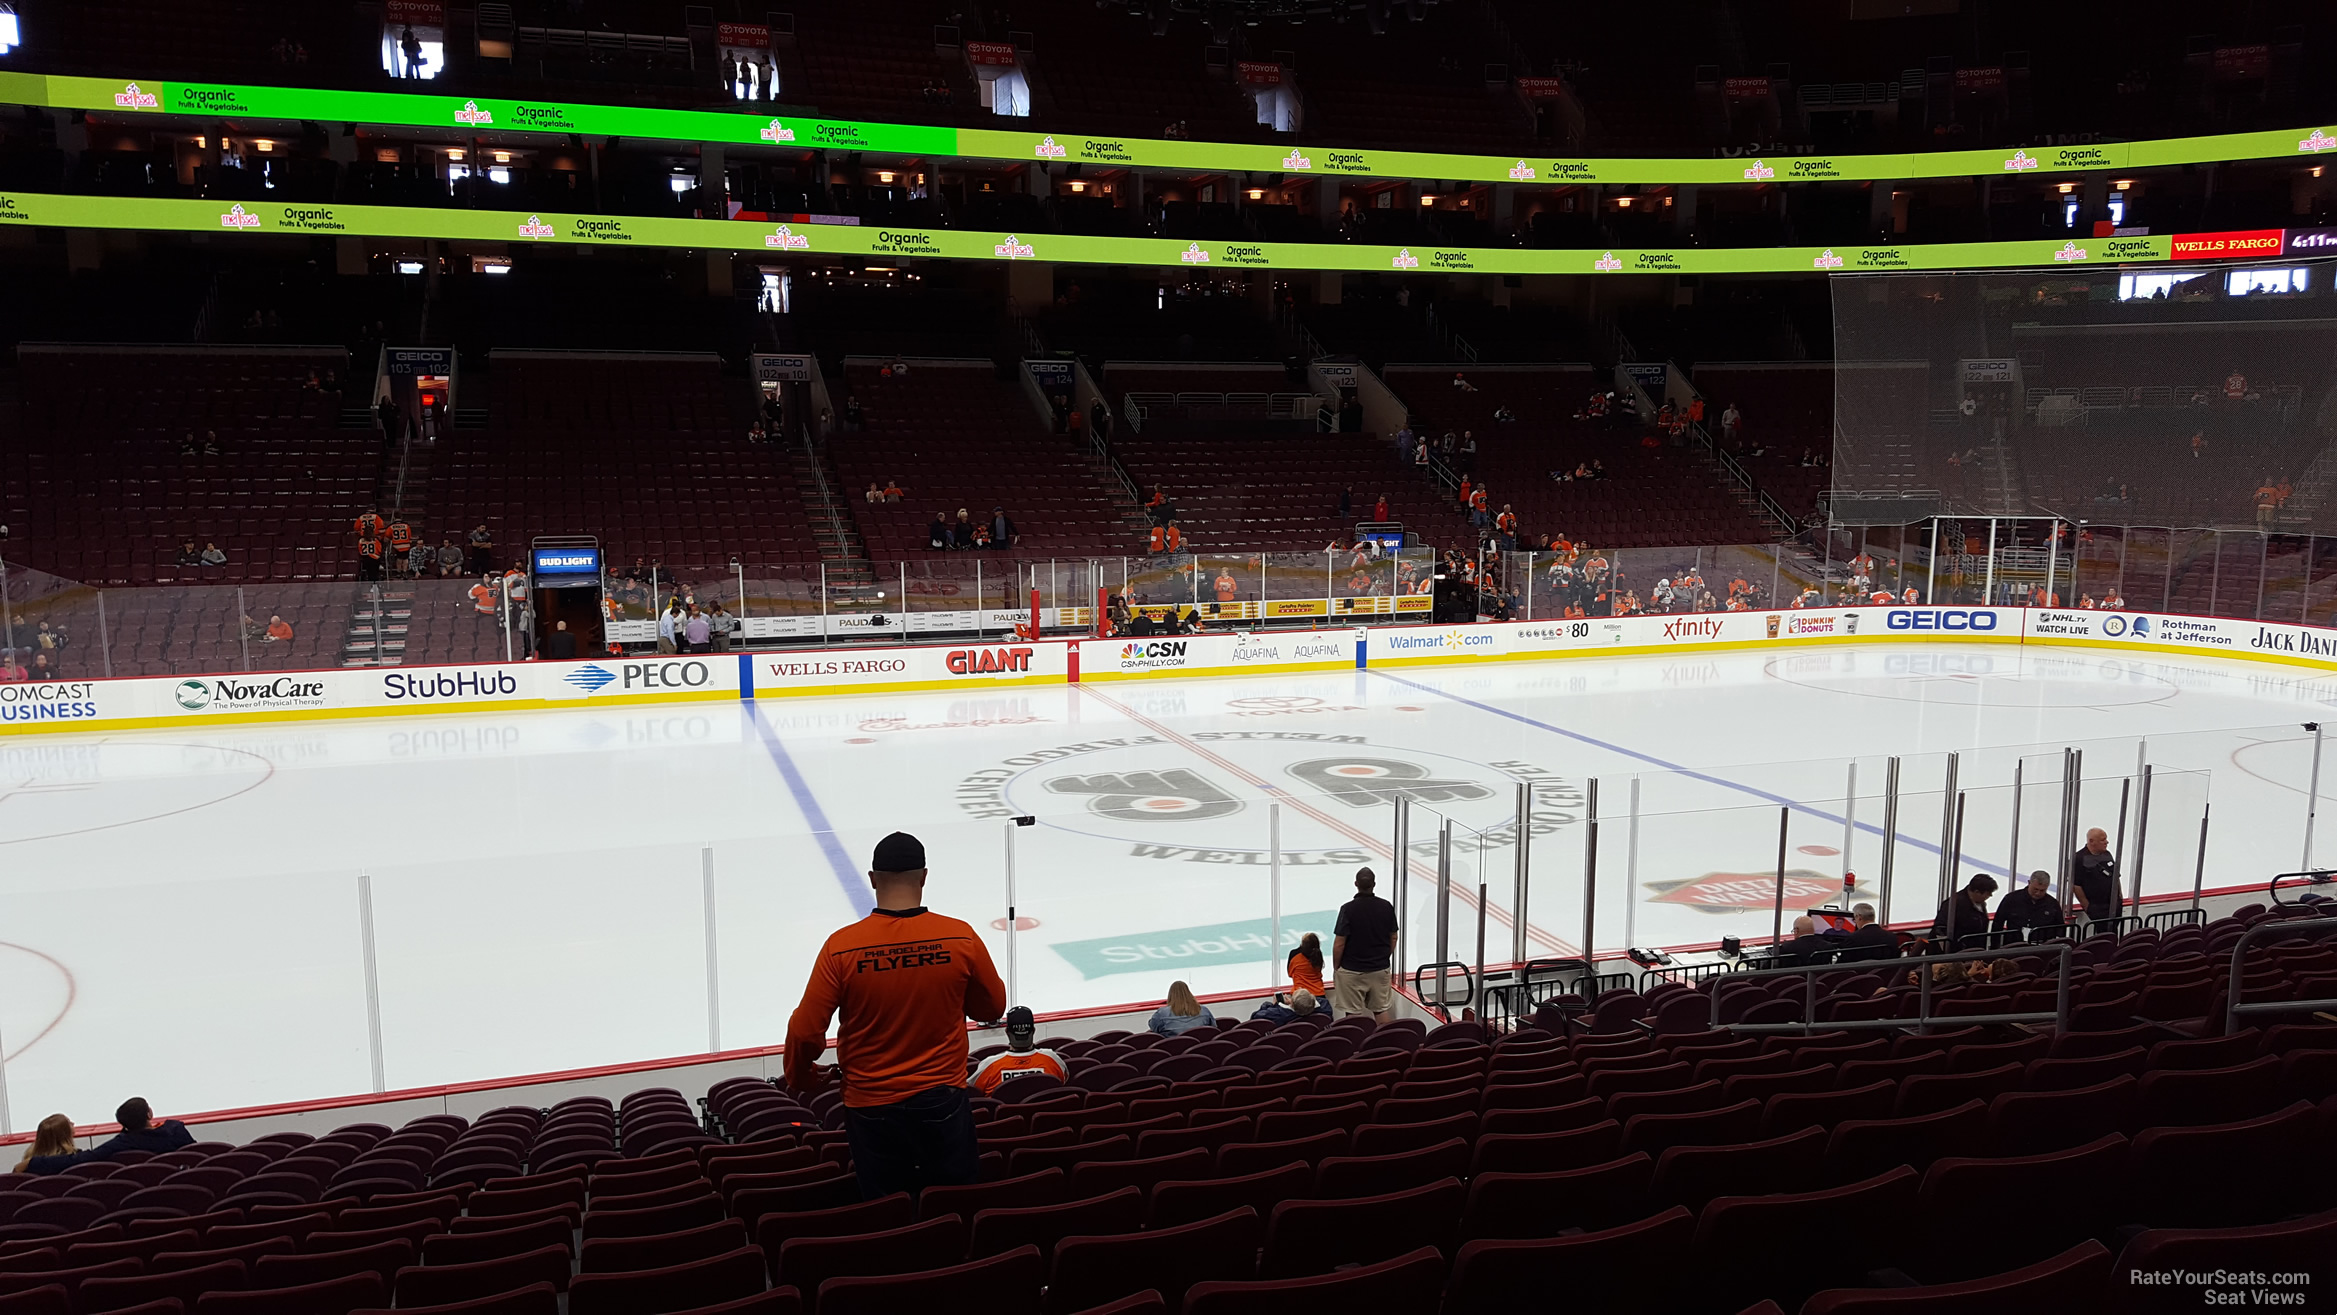 section 112, row 17 seat view  for hockey - wells fargo center